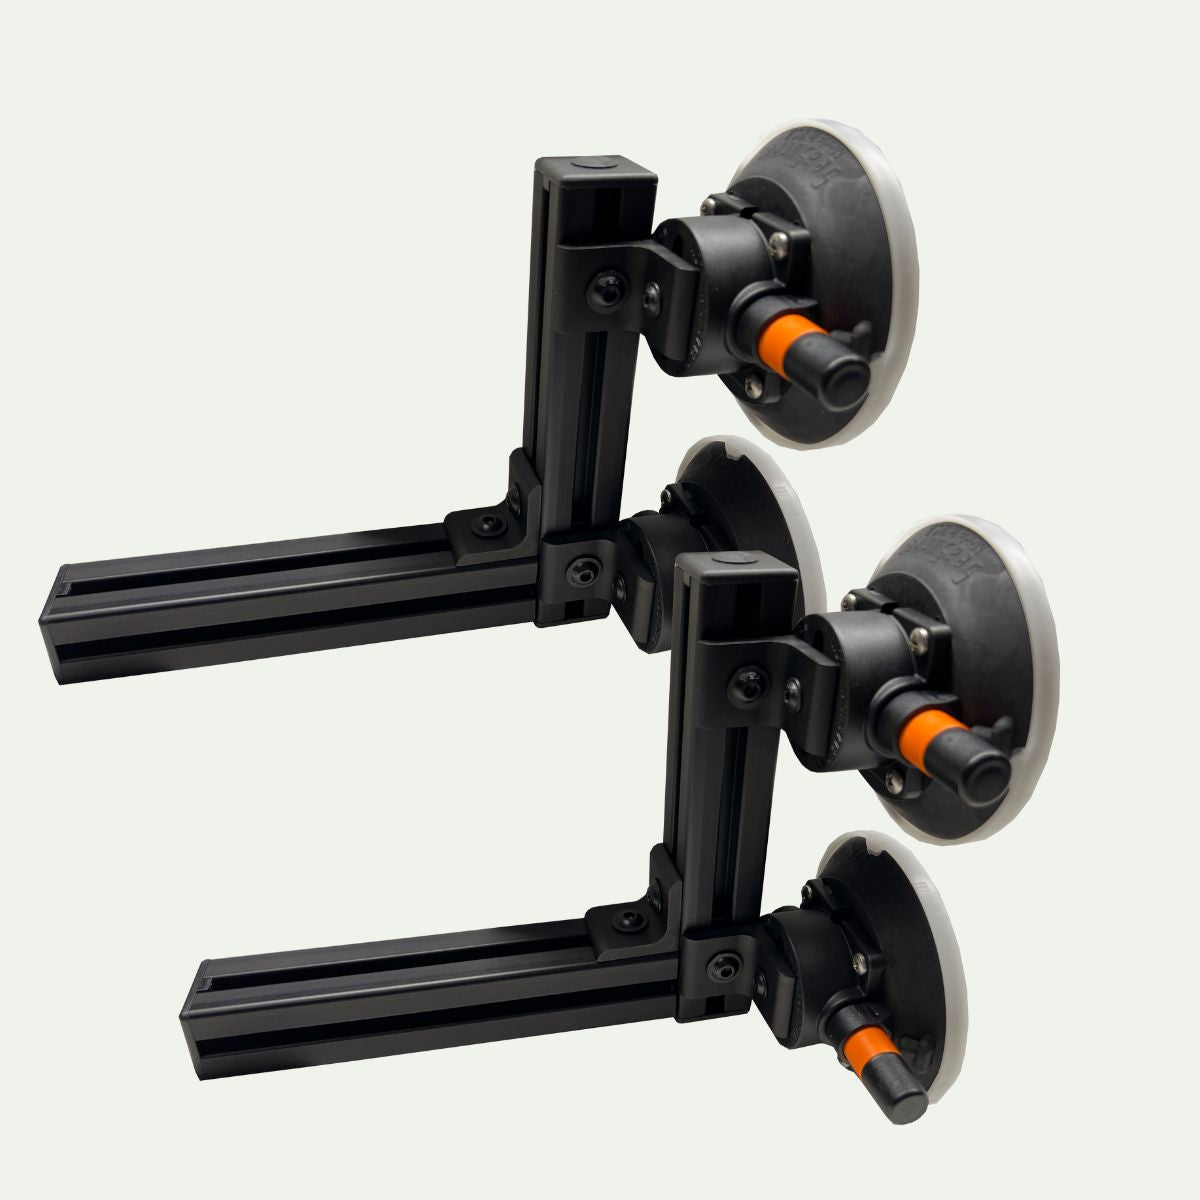 NEW -  CRC Rod Carrier Suction-Pro Mount Bars